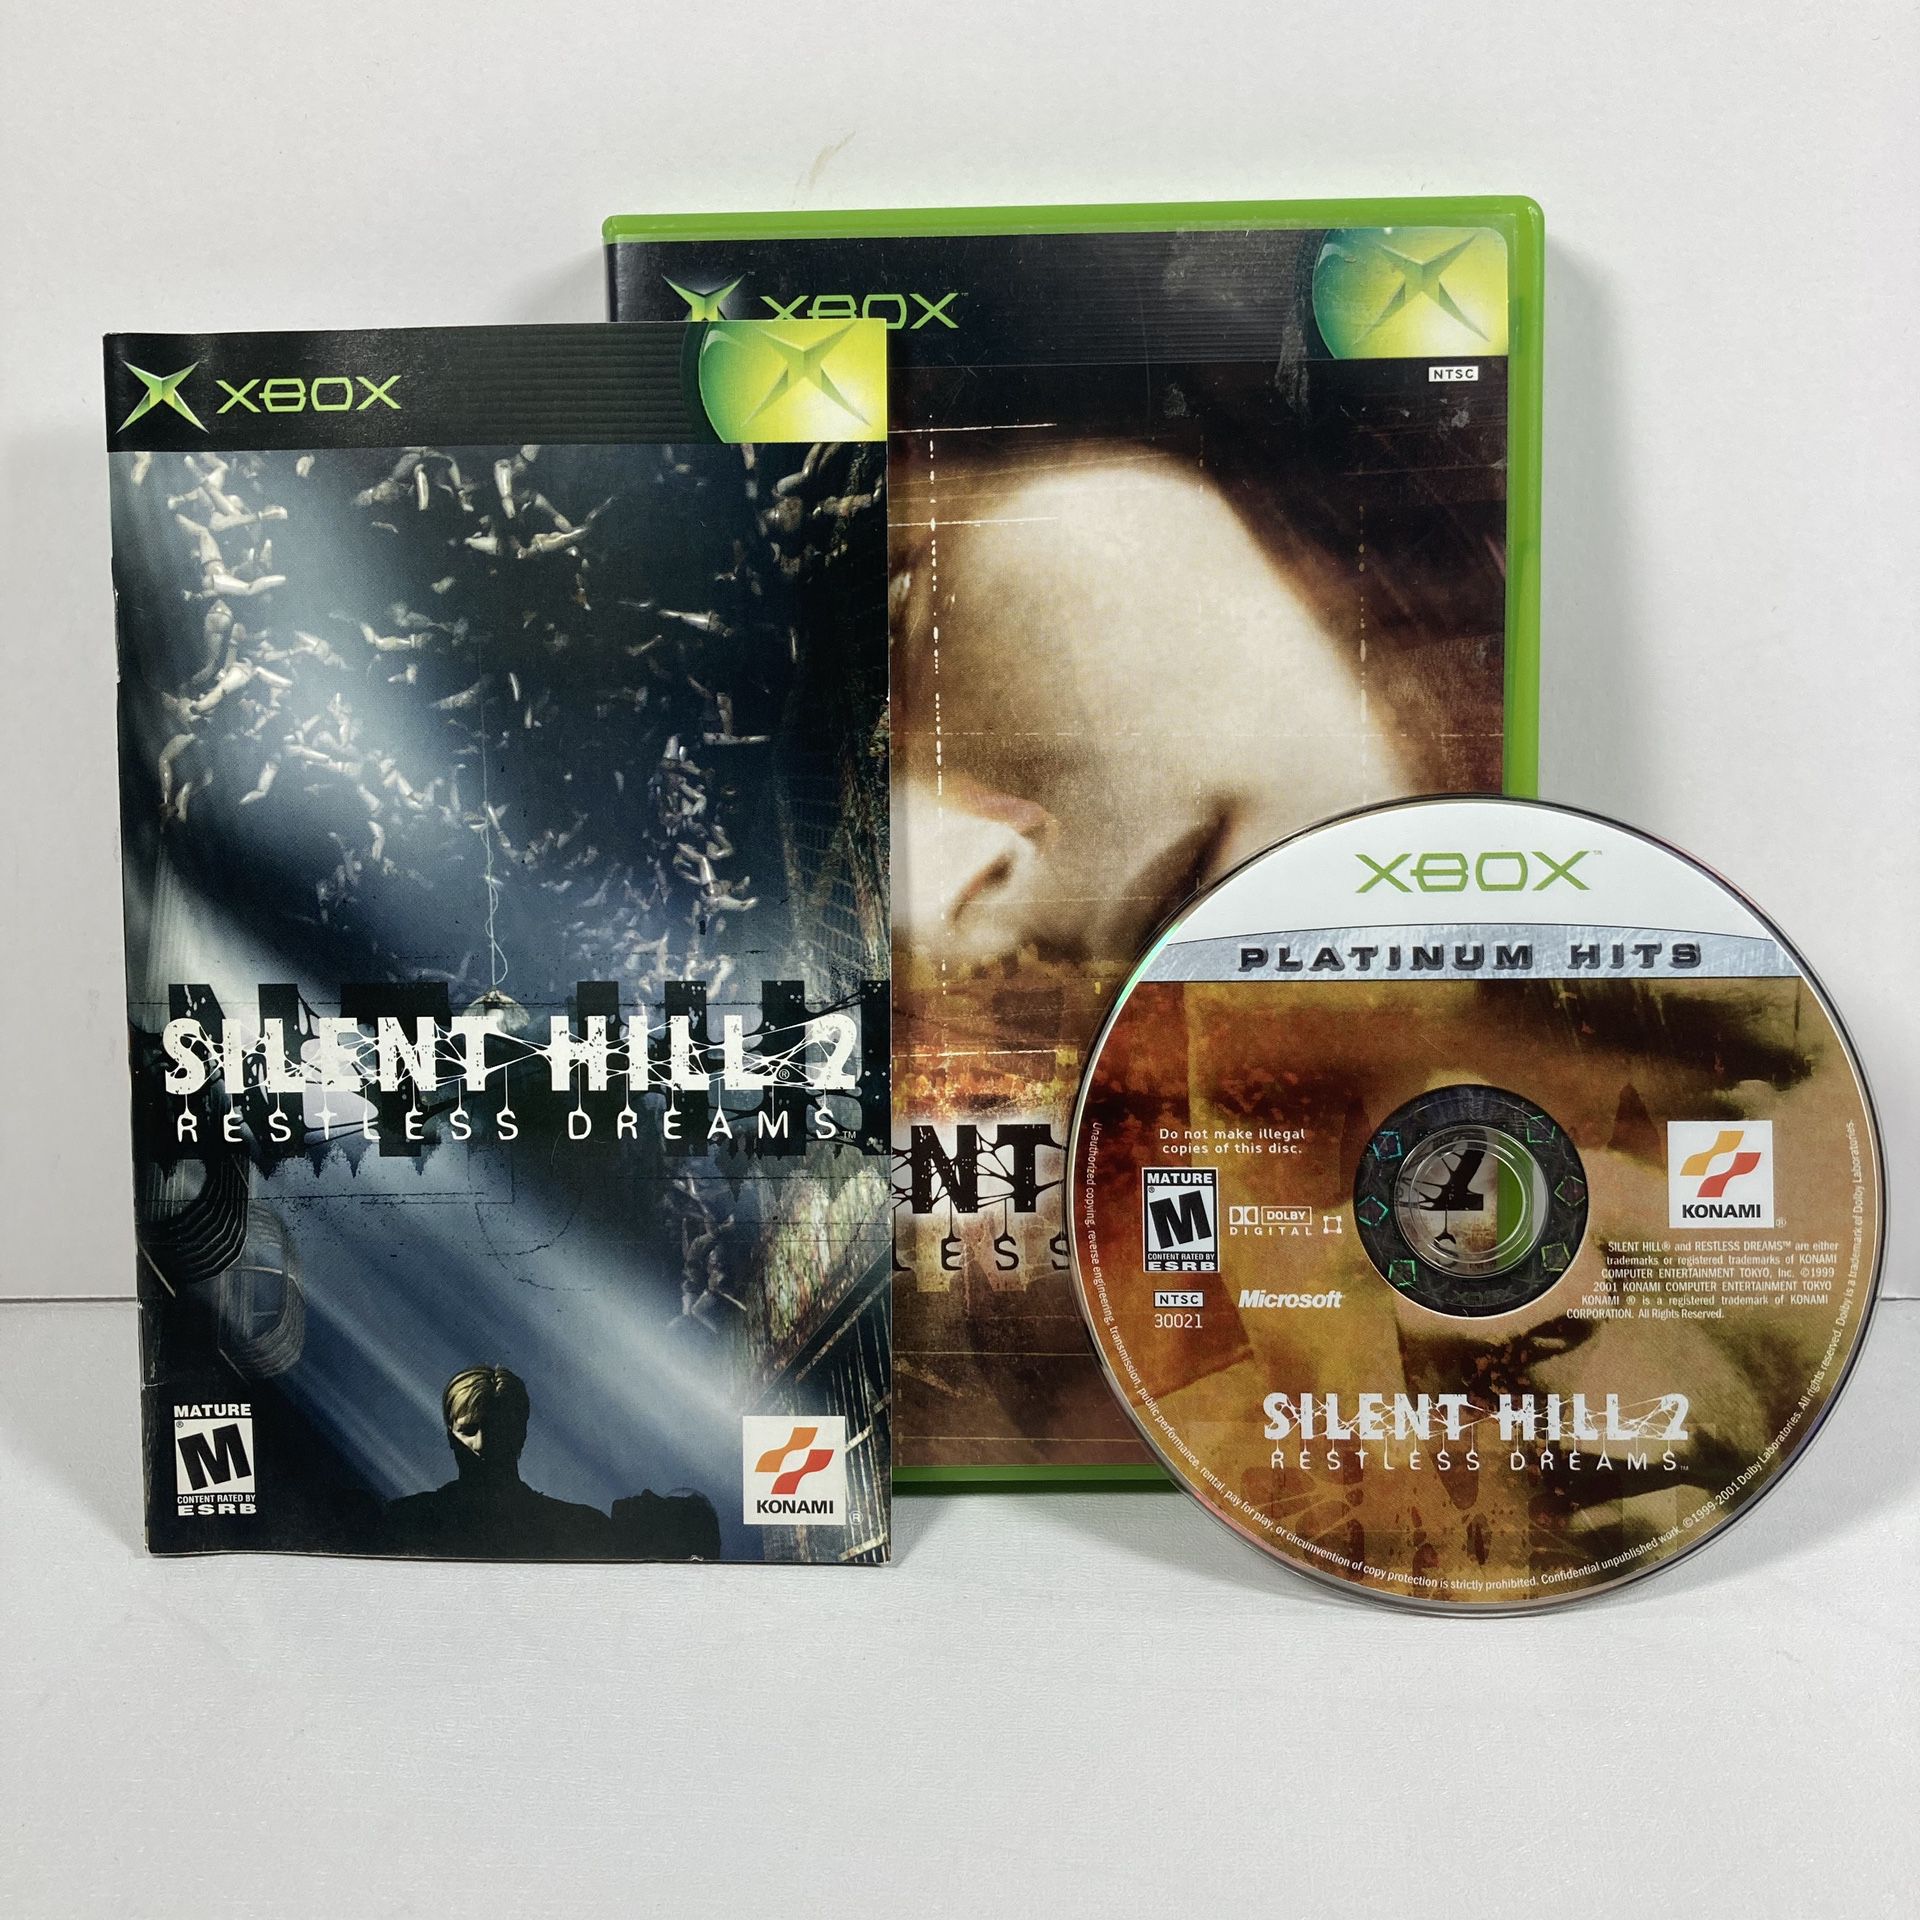 Silent Hill 2: Restless Dreams With Platinum Hits Disc Version Xbox, 2003 Tested.